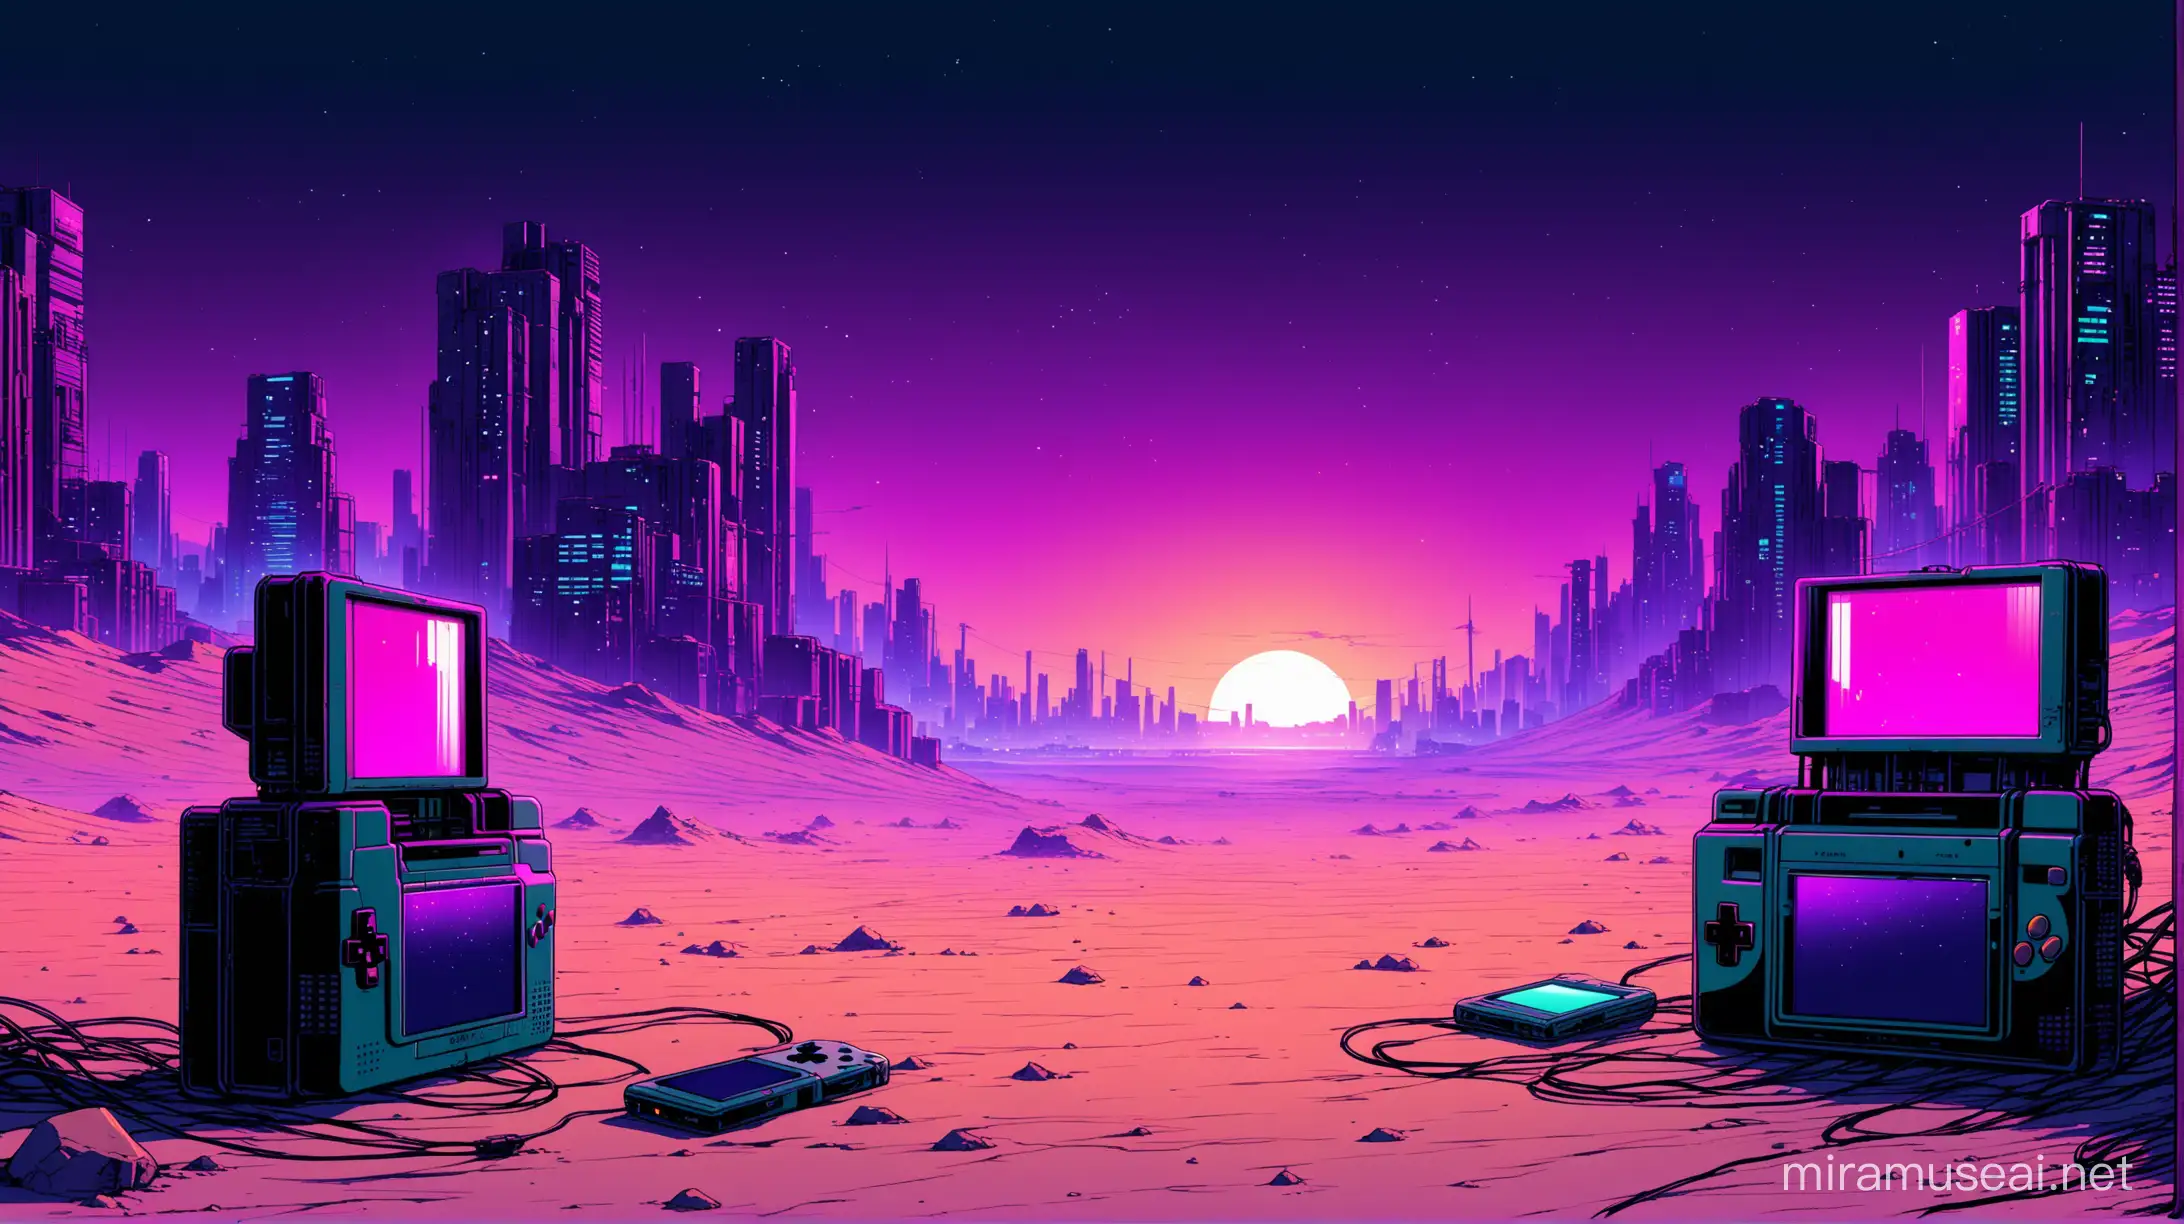 a gameboy lost in an abandonned desert, cyberpunk, akira, dystopian synthwave abandonned city, lot of colors, night, abandonned broken computers